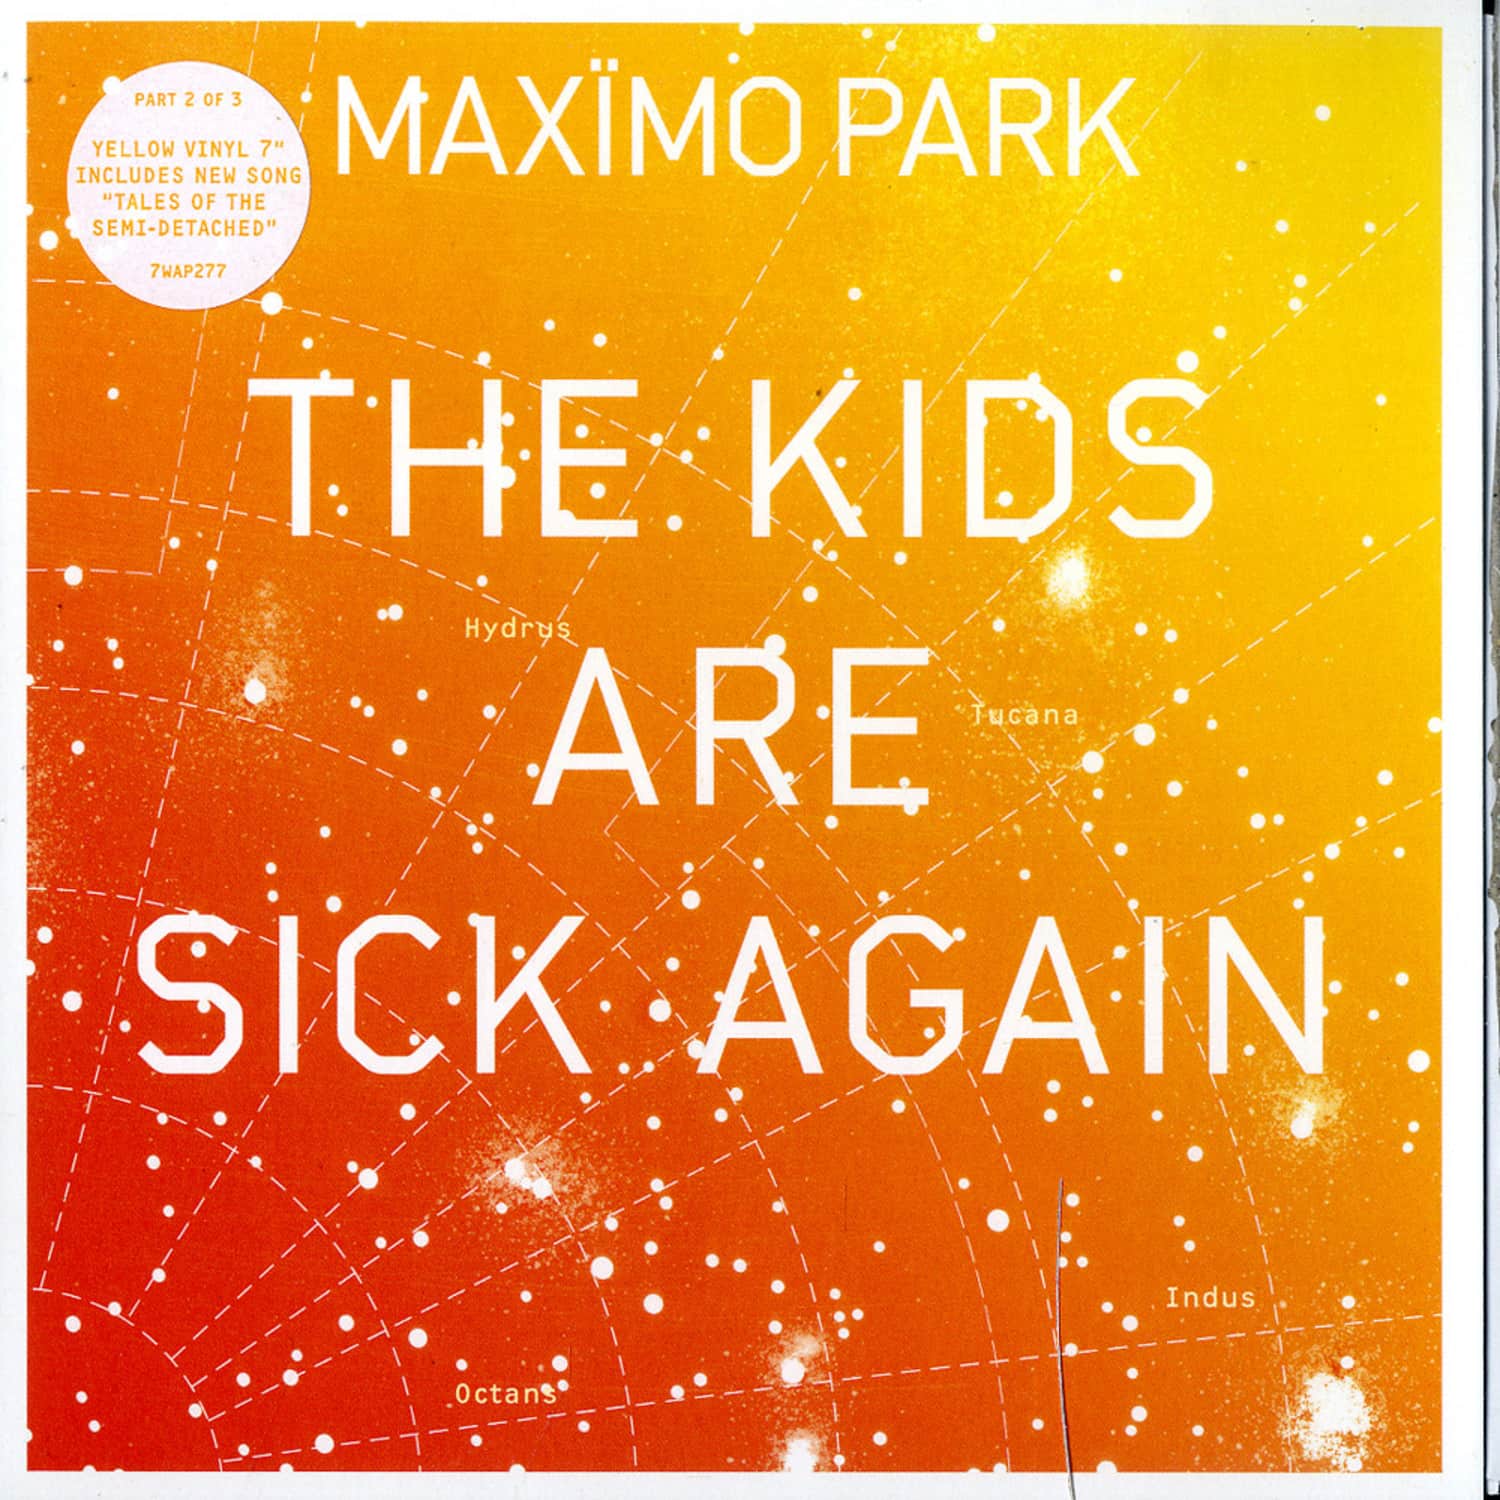 Maximo Park - THE KIDS ARE SICK AGAIN- PART 2 OF 3 